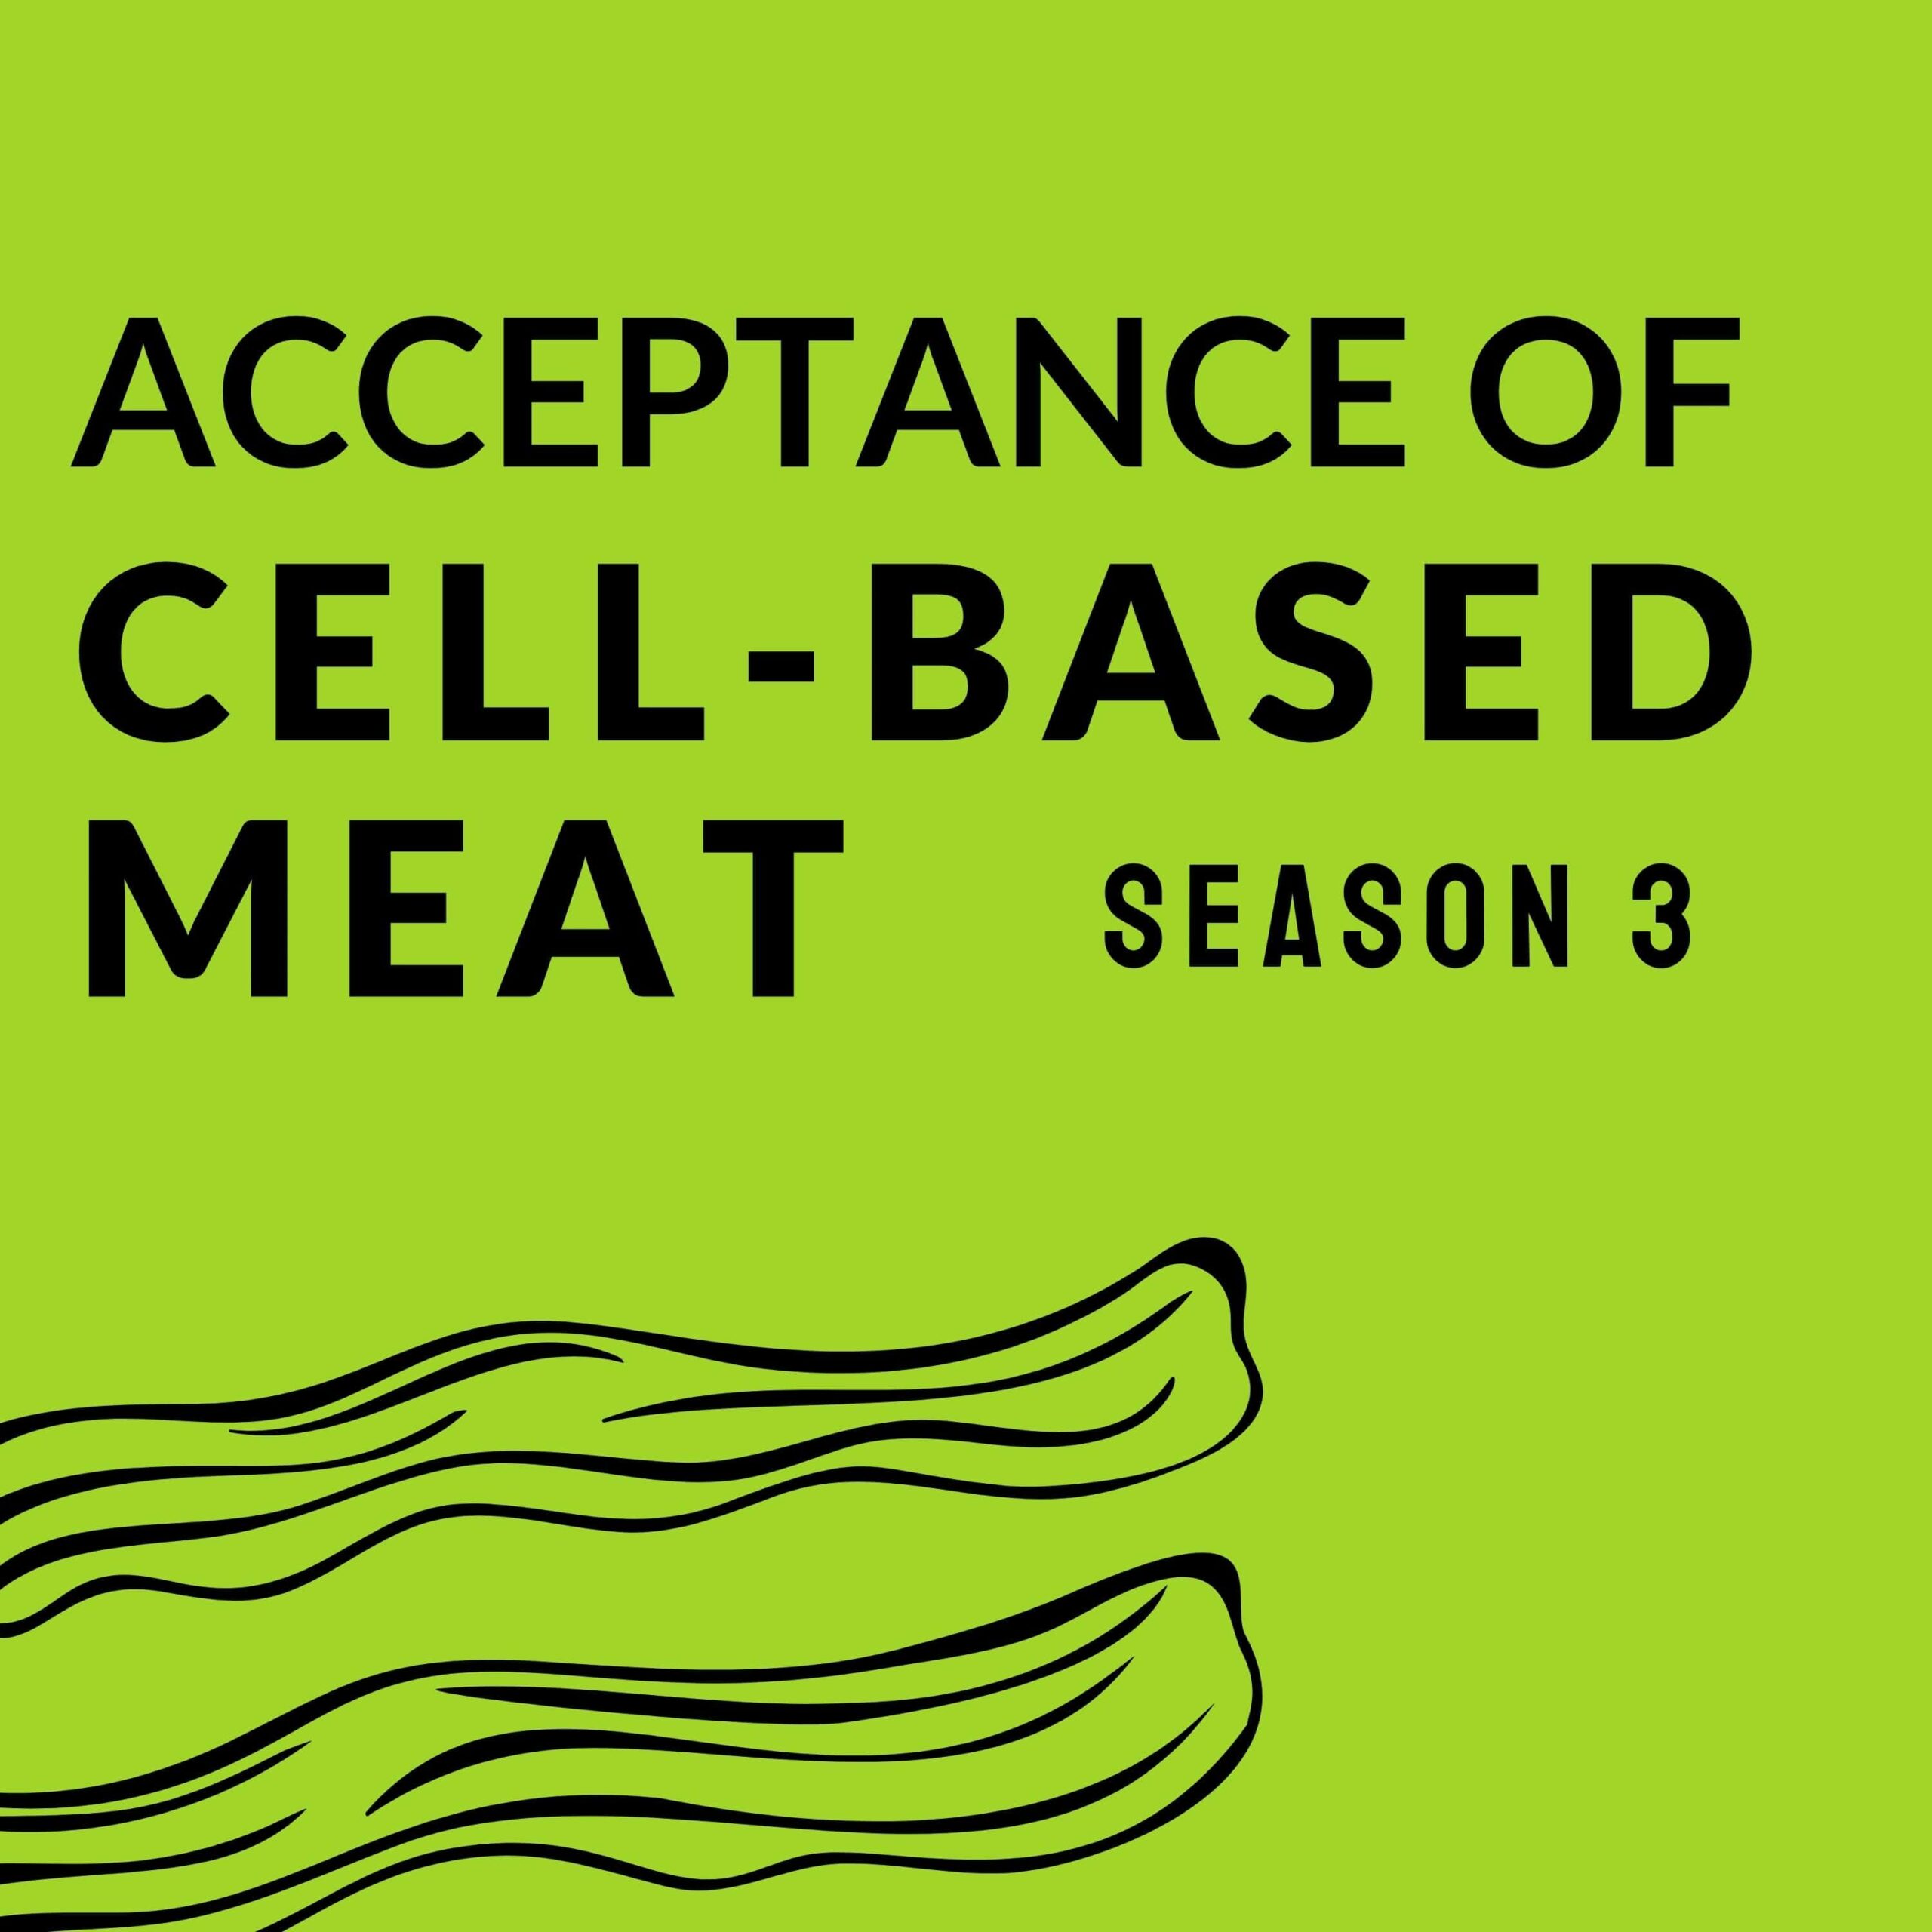 Consumer acceptance of cultured meat, cultured meat podcast, cultivated meat podcast, cell-based meat podcast, alternative protein podcast, Consumer acceptance of cell-based meat, cellular agriculture